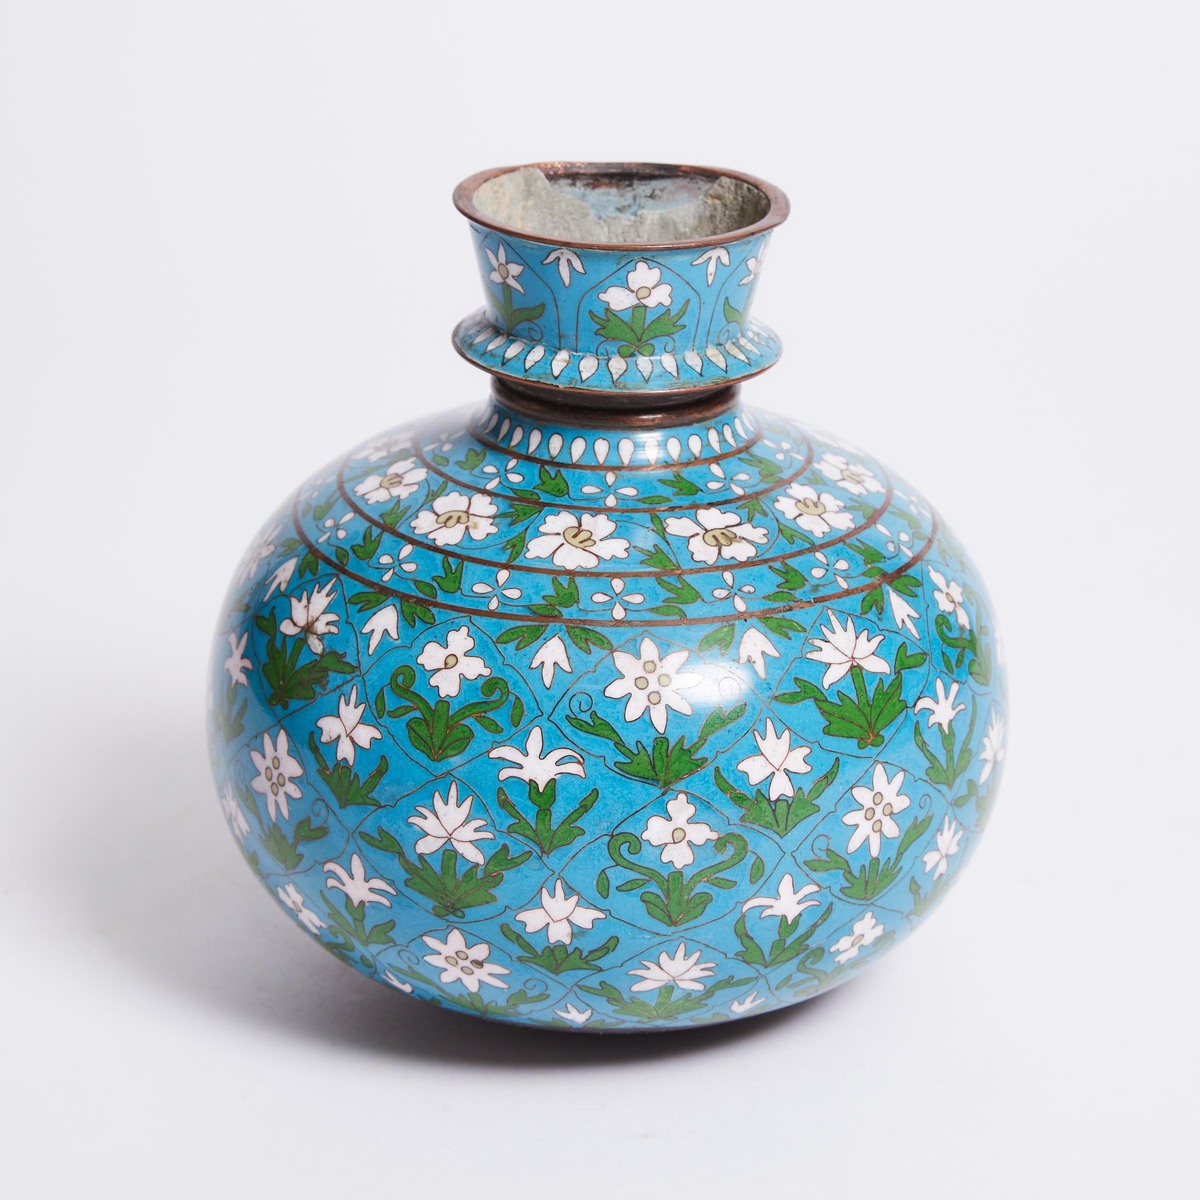 A Canton Enamel on Copper Huqqa Base for the Indian Market, 19th Century, 清 十九世纪 外销印度铜胎画珐琅水烟瓶, heigh - Image 2 of 3